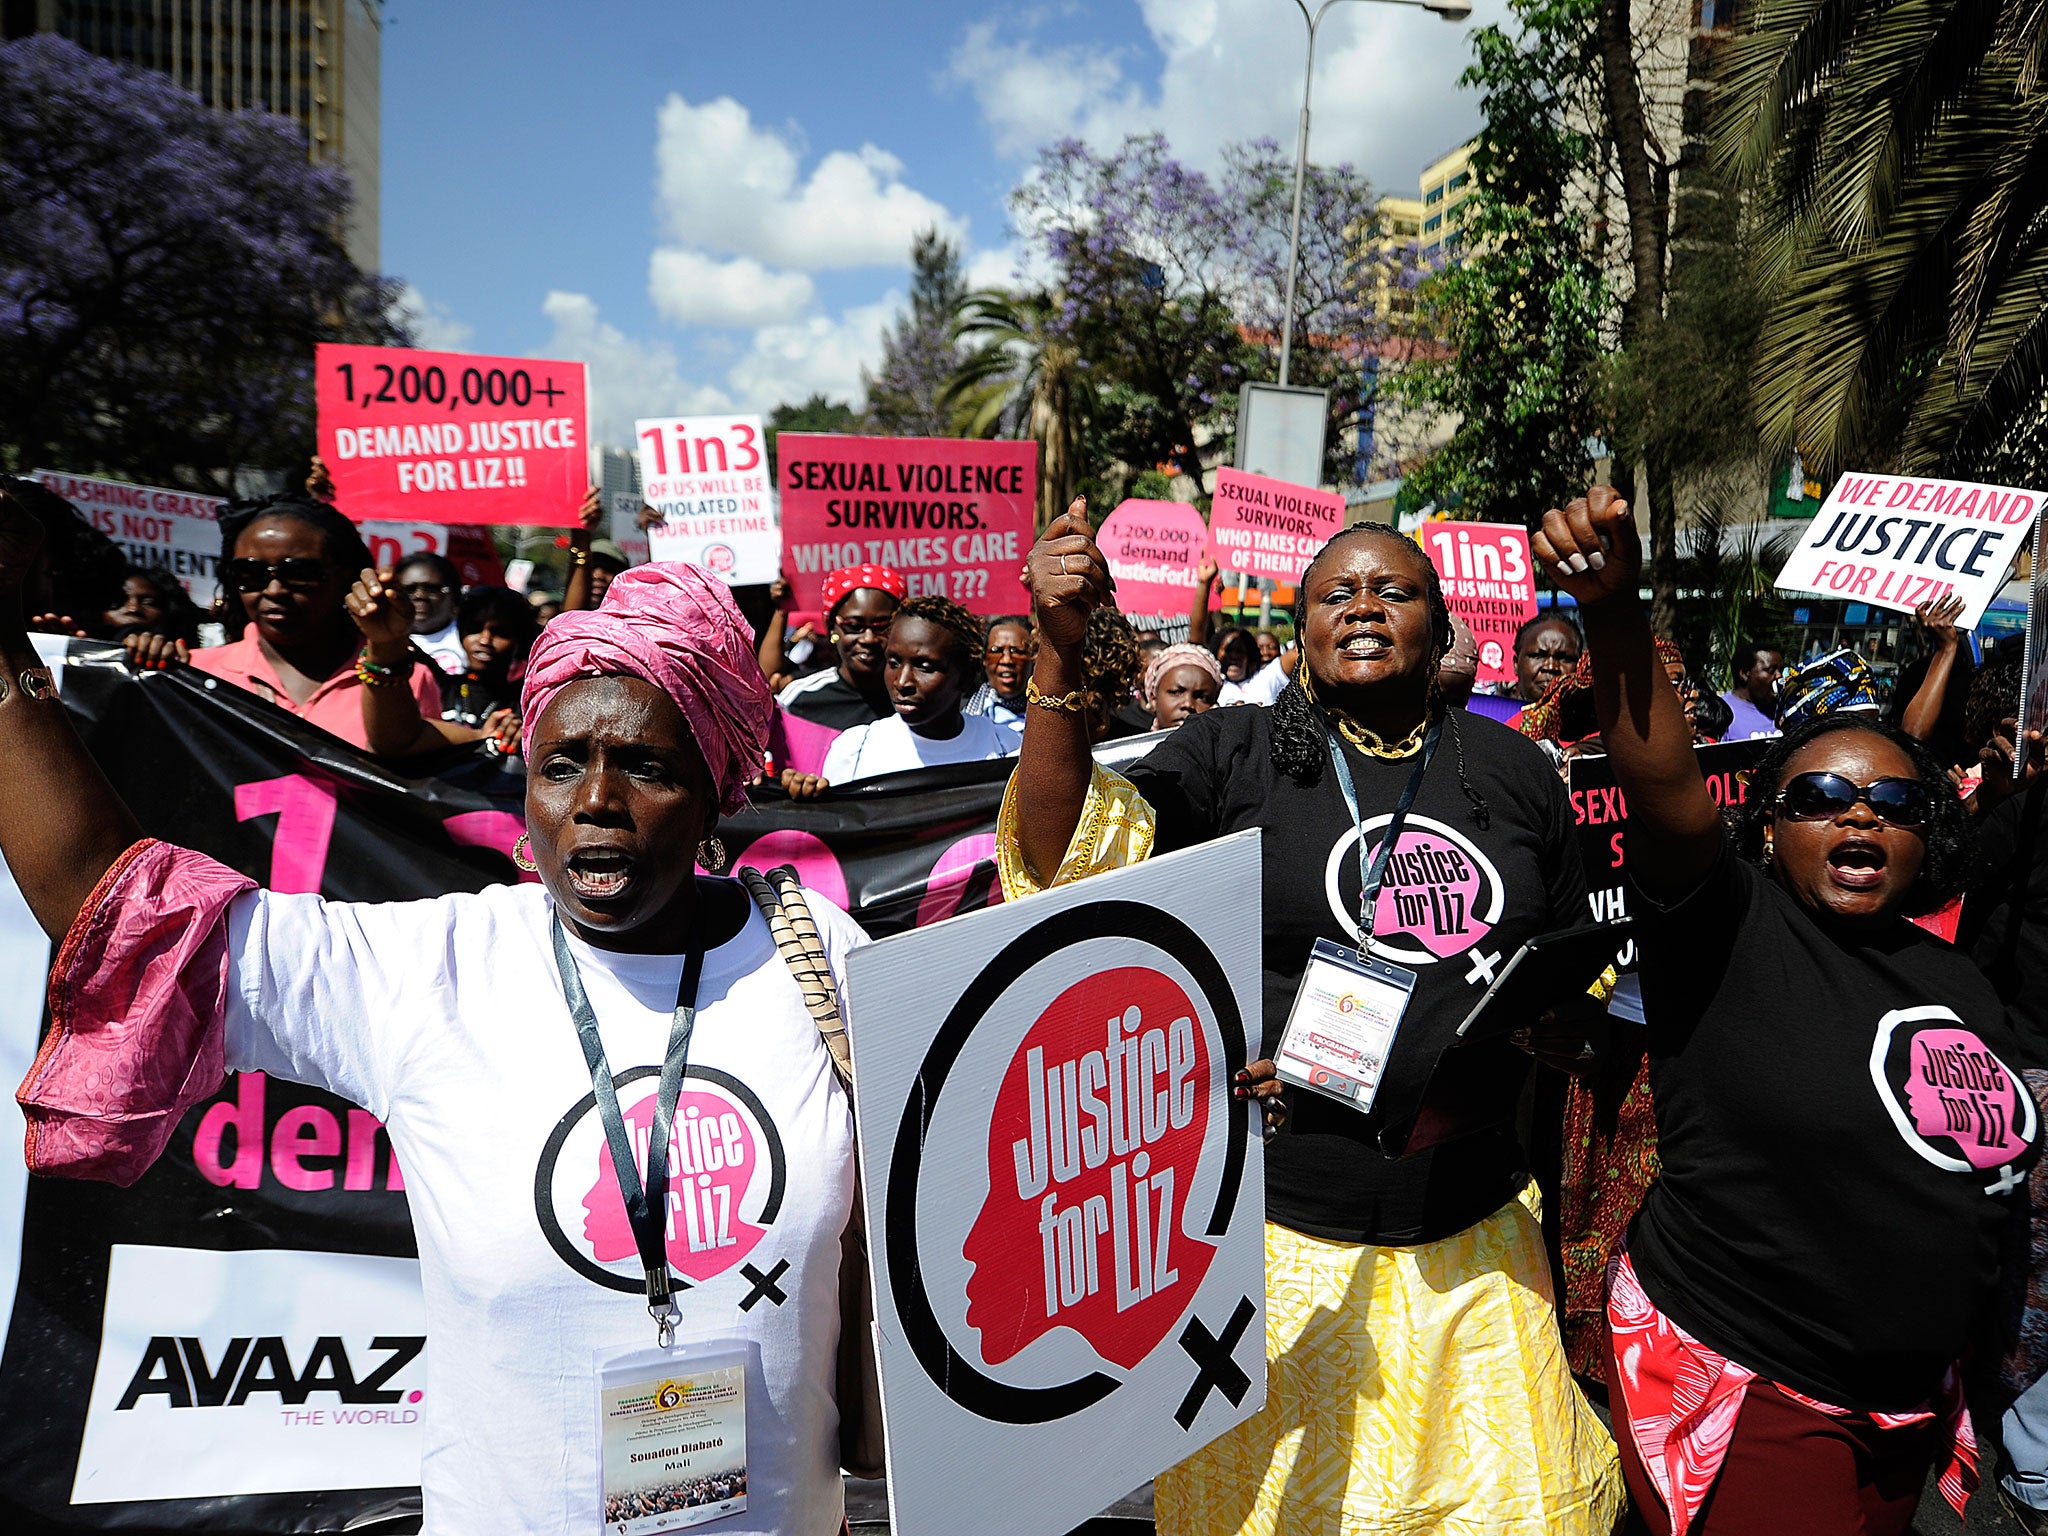 Kenyan protesters march towards the police headquarters on 31 October 2013. (Photo: SIMON MAINA/AFP/Getty Images)